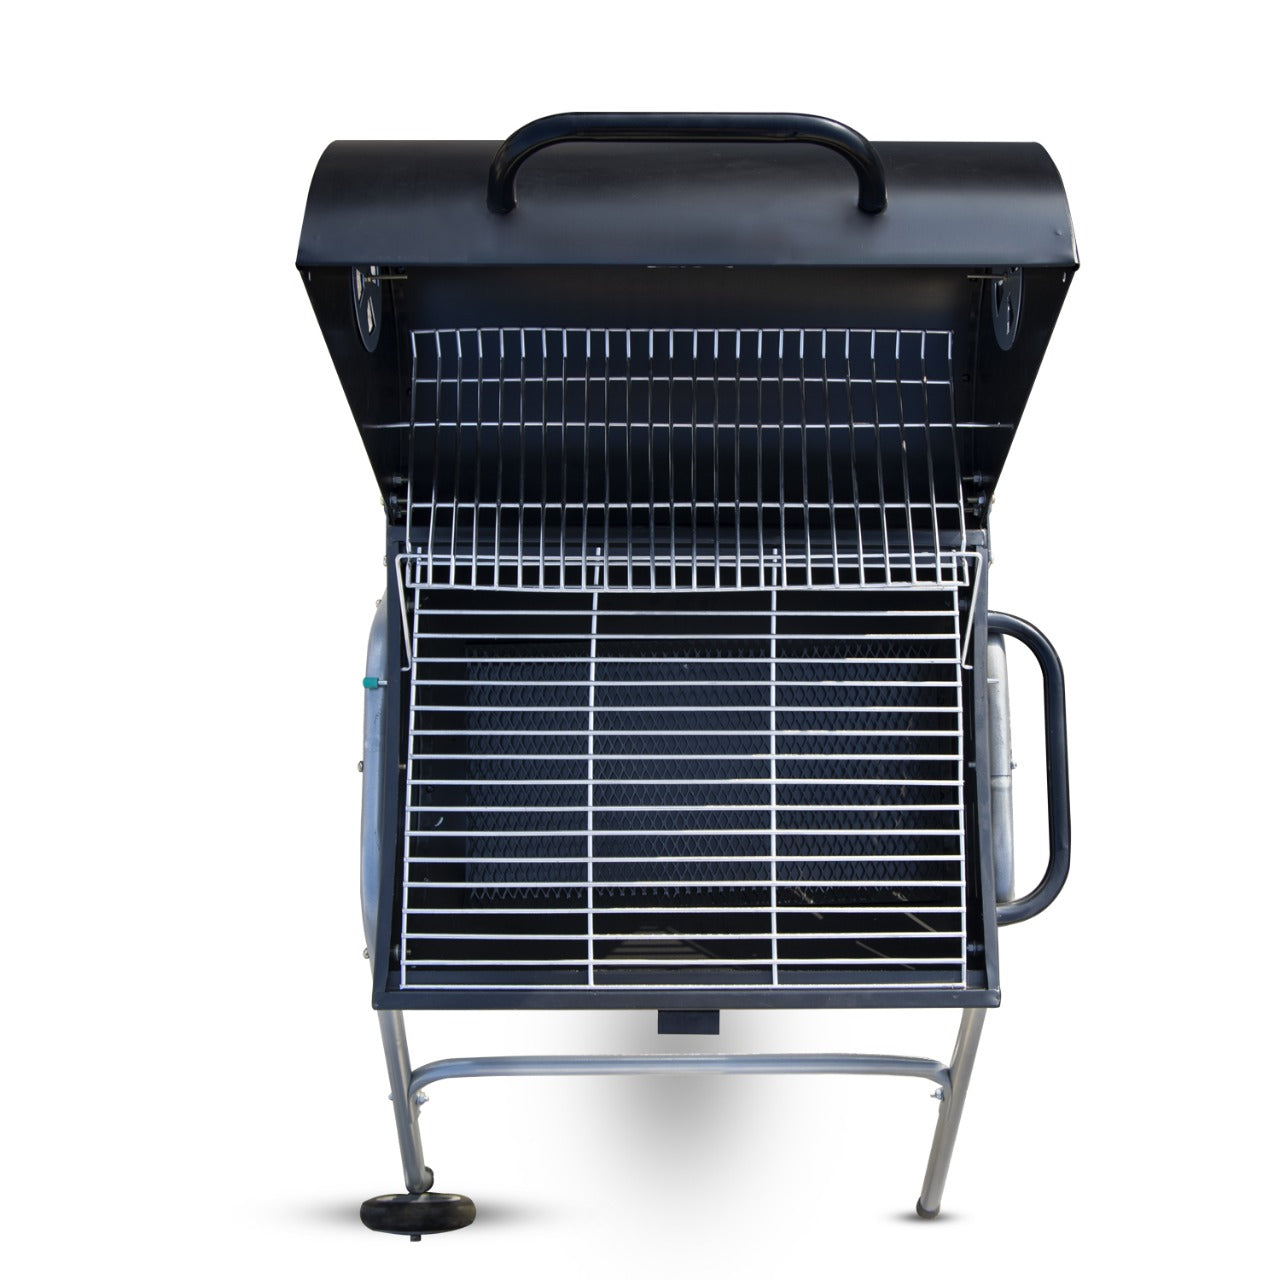 Charcoal Compact Barbecue with Grill Kit